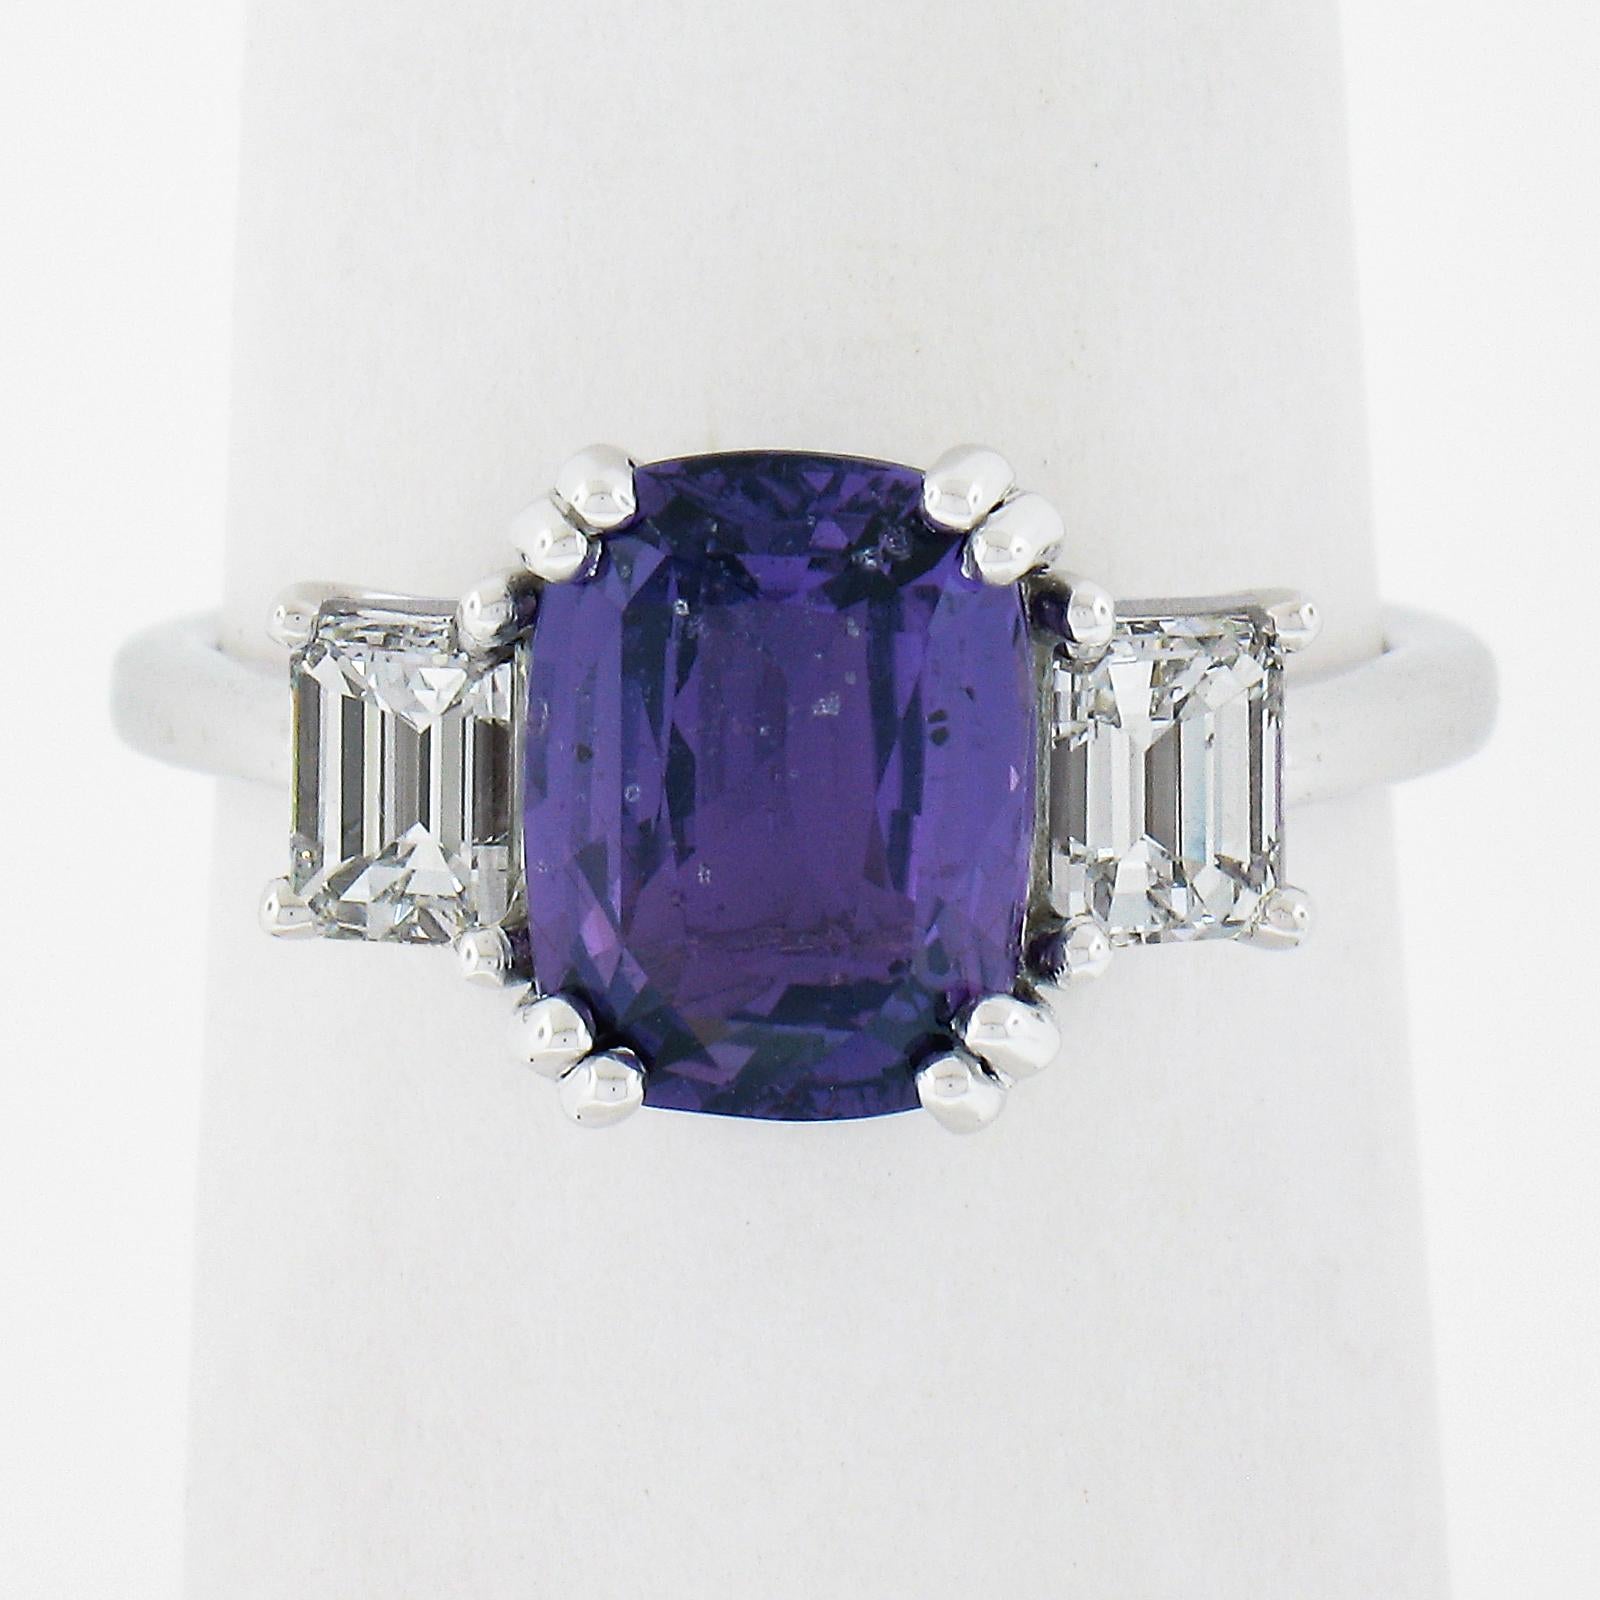 --Stone(s):--
(1) Natural Genuine Sapphire - Elongated Cushion Cut - Dual Claw-Prong Set - Vivid Pure Purple Color w/ Few Natural Inclusions - NO HEAT - 3.01ct (exact - certified)
** See Certification Details Below for Complete Info **
(2) Natural